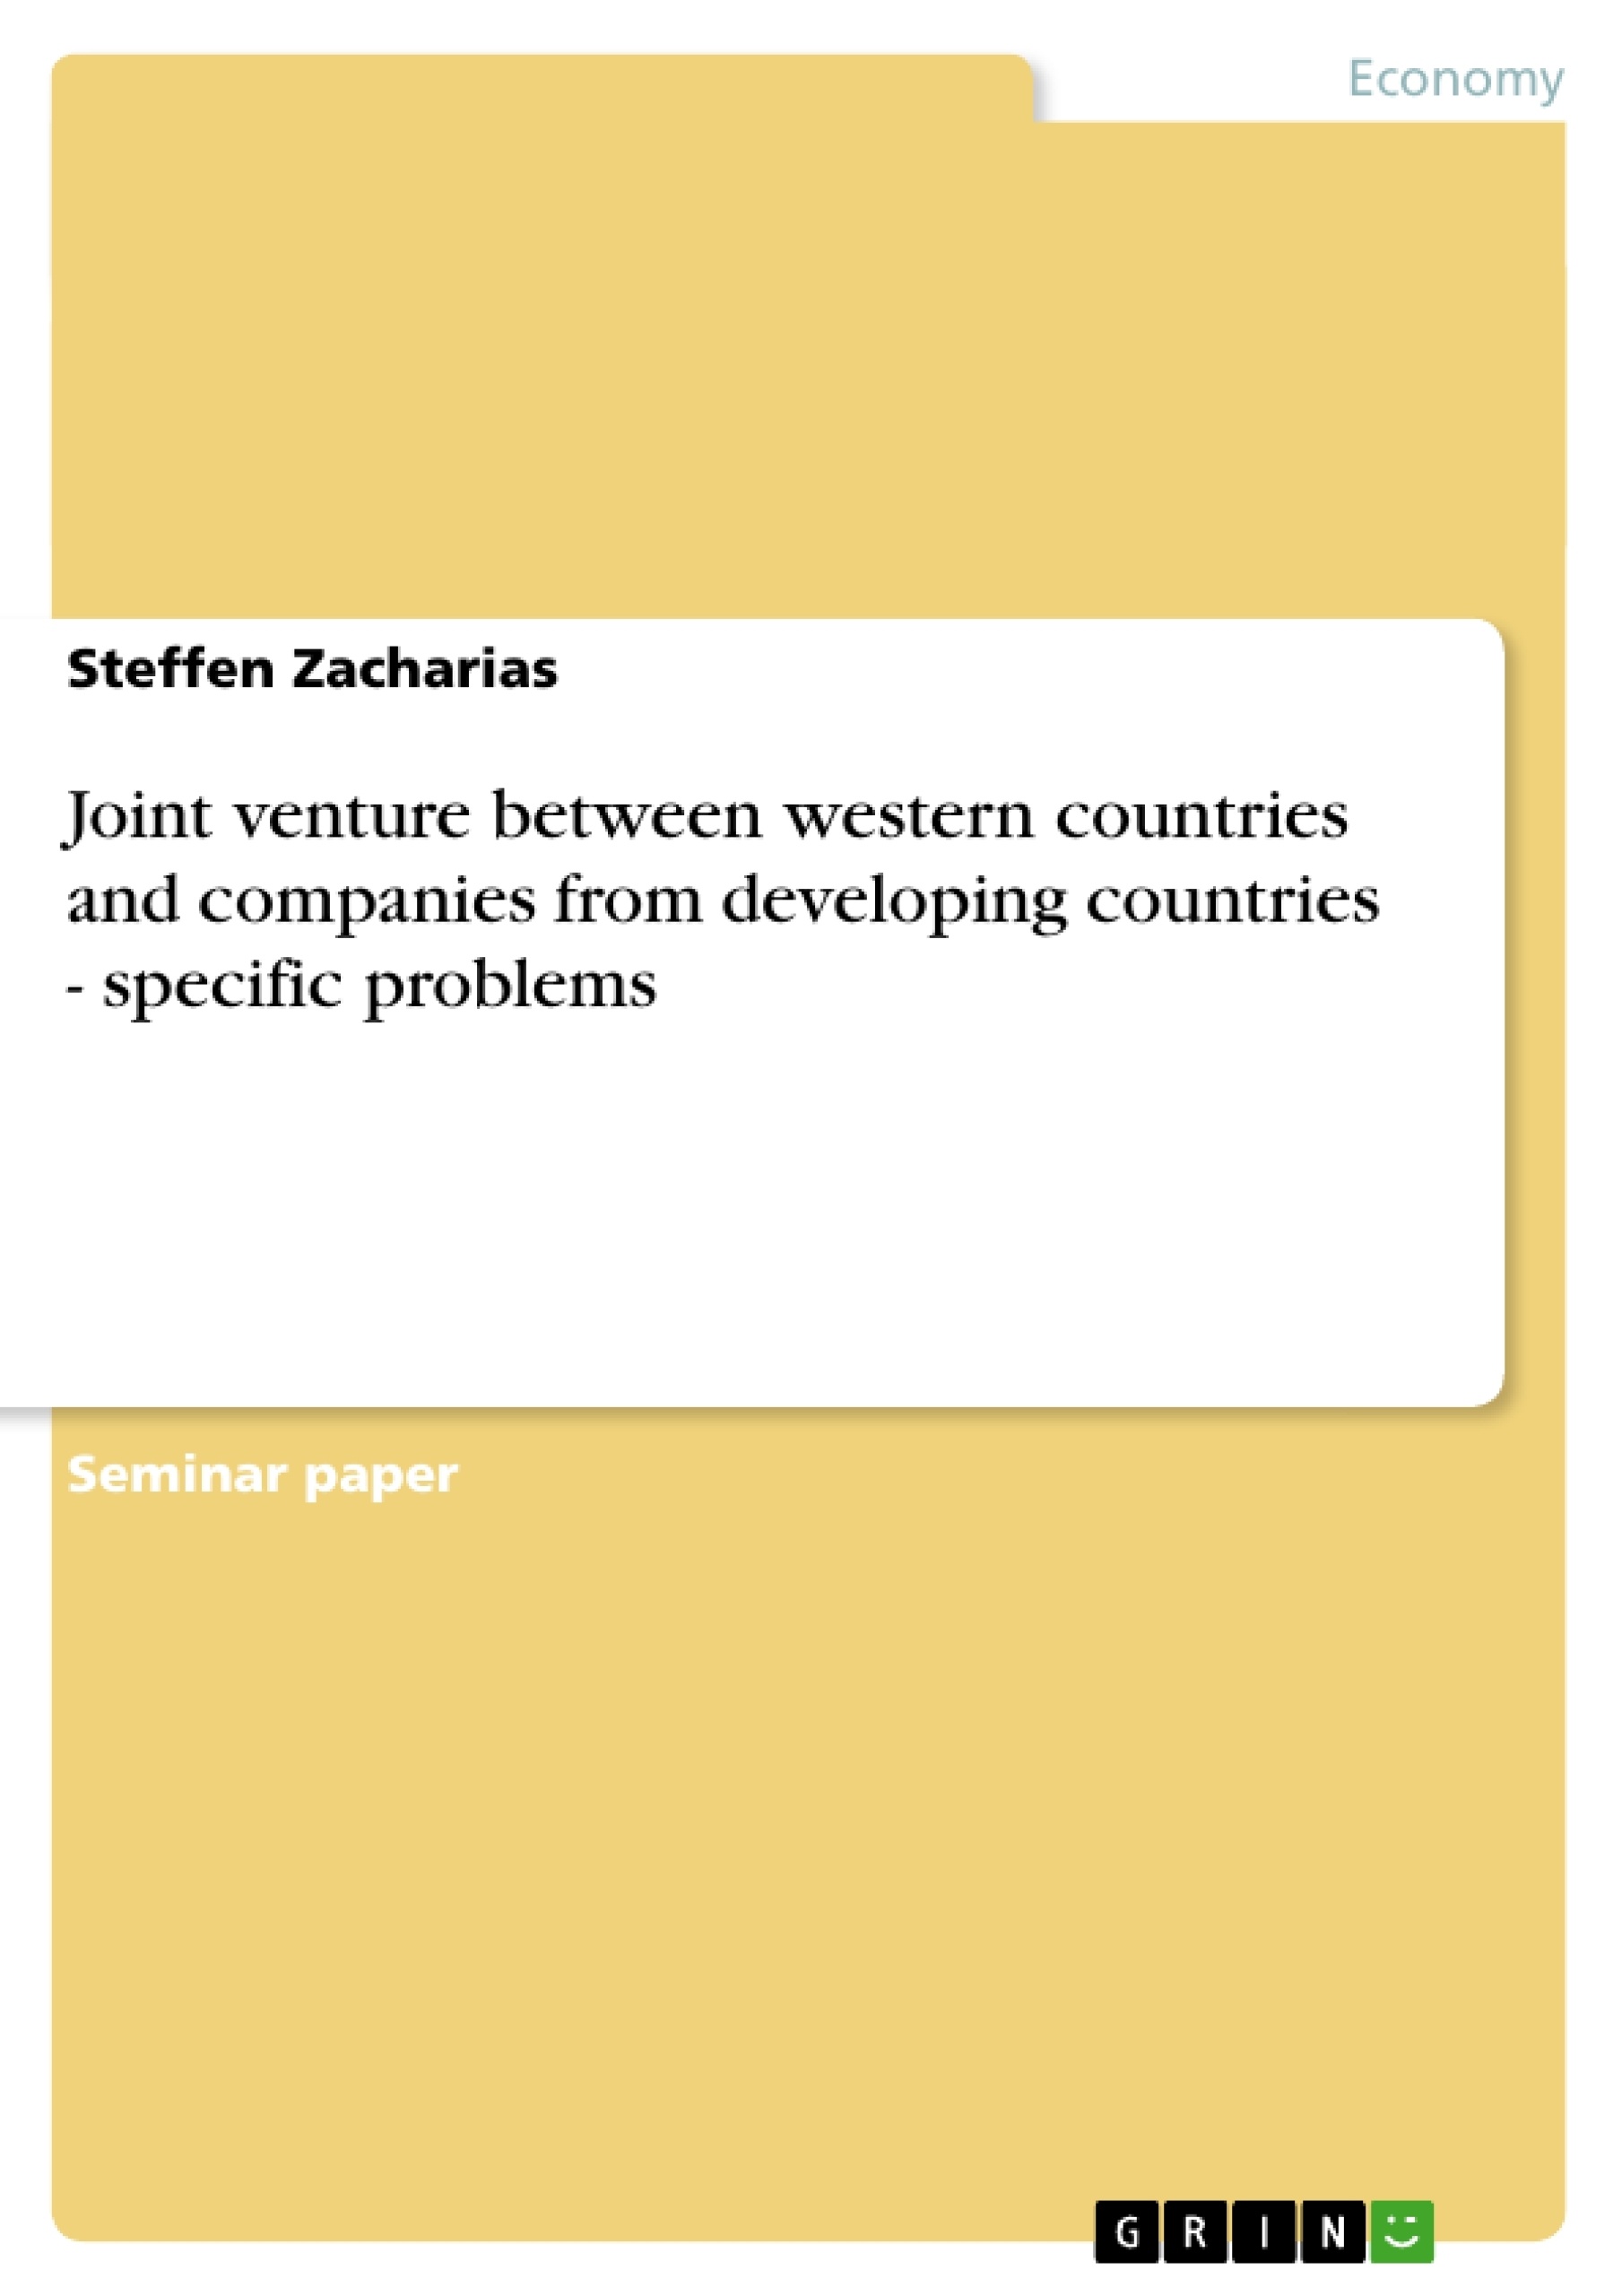 Title: Joint venture between western countries and companies from developing countries - specific problems